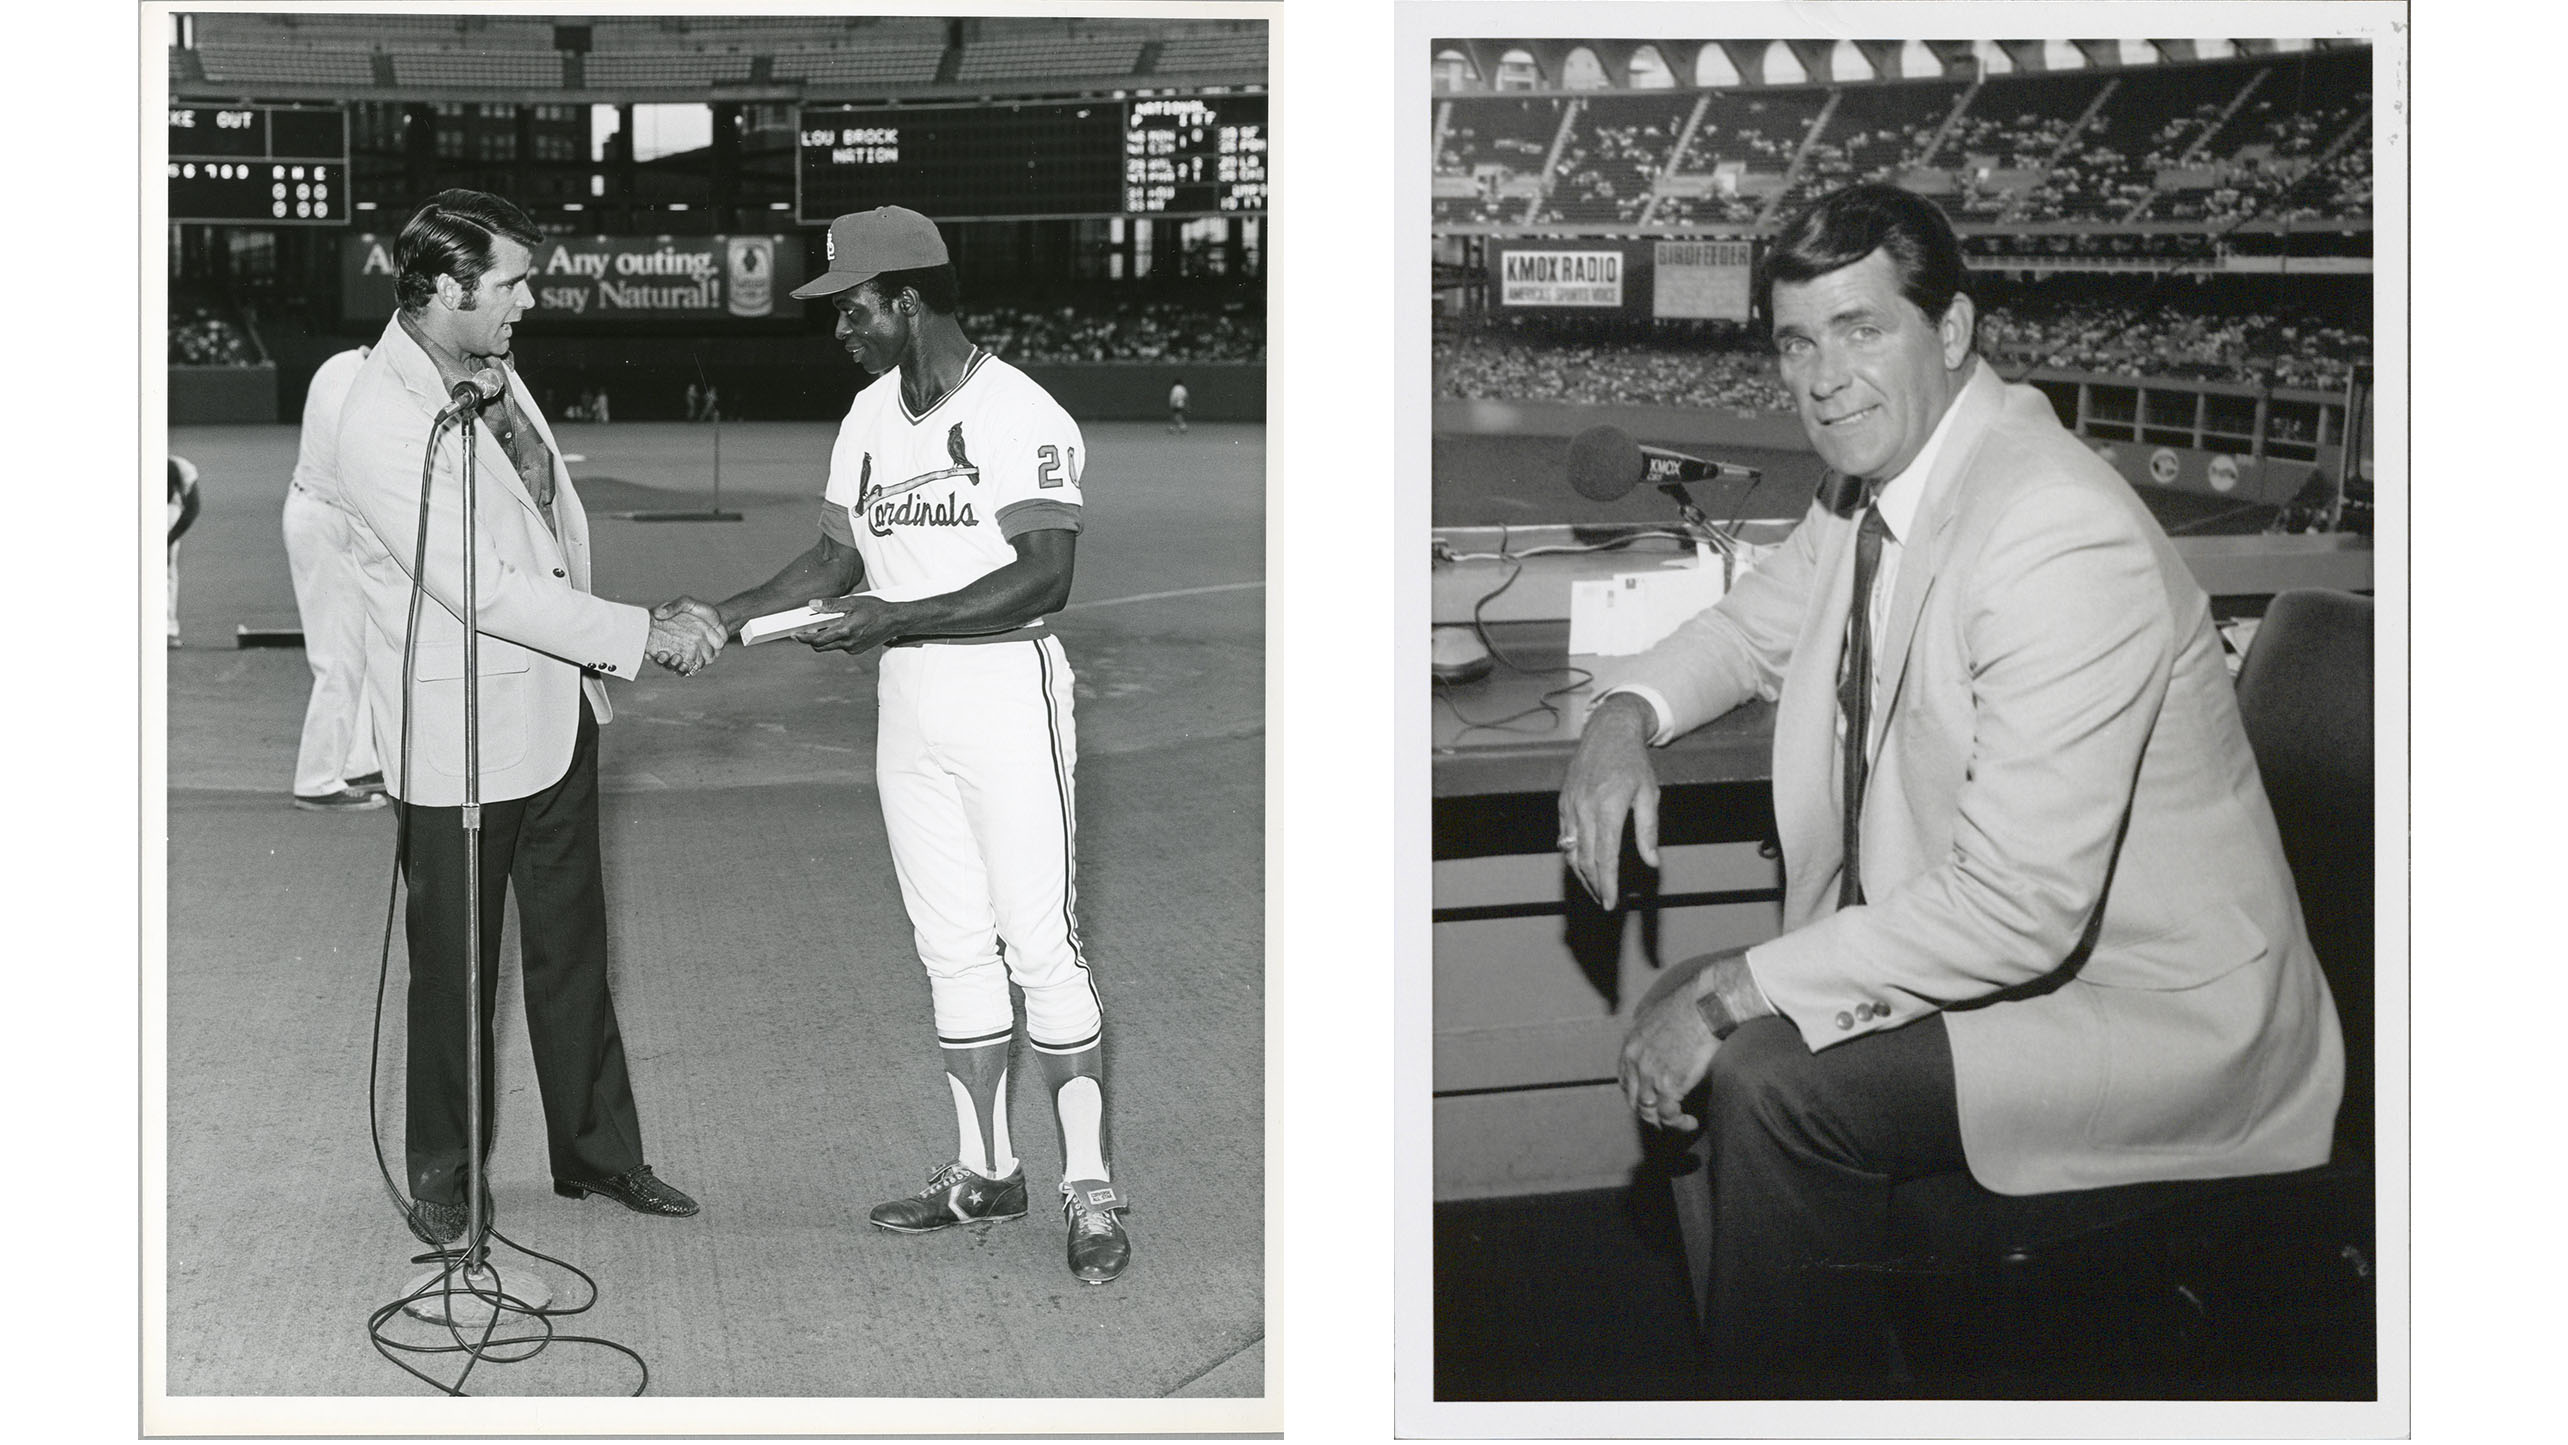 Mike Shannon - Celebrating 50 Years in the Broadcast Booth